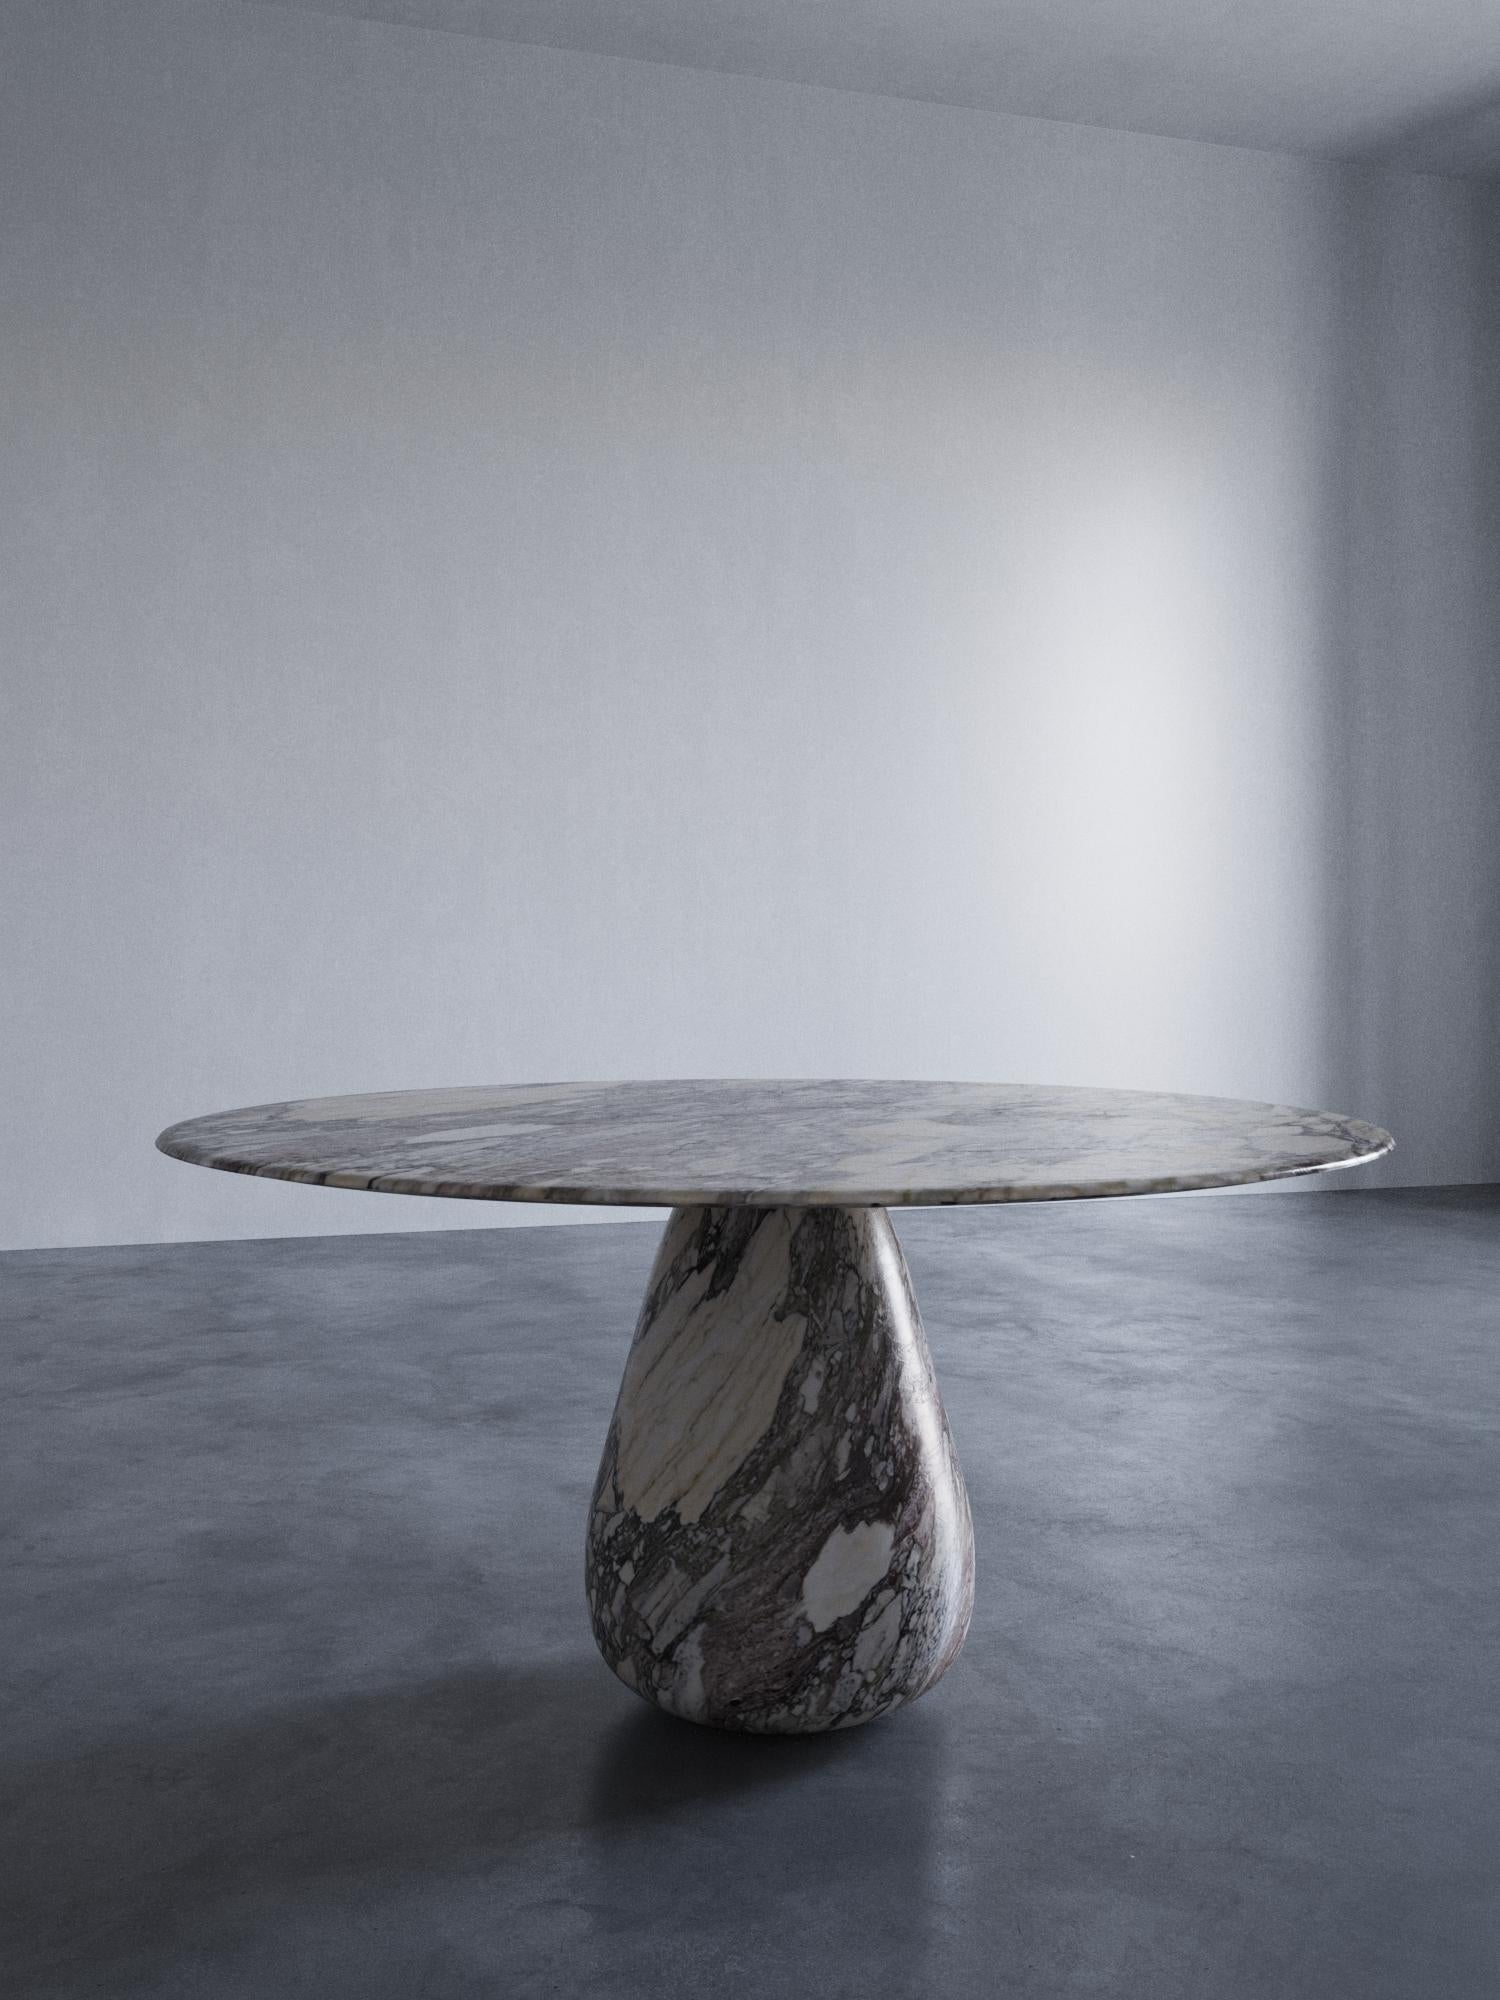 Sasso Marble Dining Table by ​STUDIO IB MILANO
Signed
Dimensions: D 150 x H 75 cm.
Materials: Arabescato Rosa marble.

Also available in other stones.

Behold the awe-inspiring presence of the SASSO dining table, a monolithic marvel that showcases